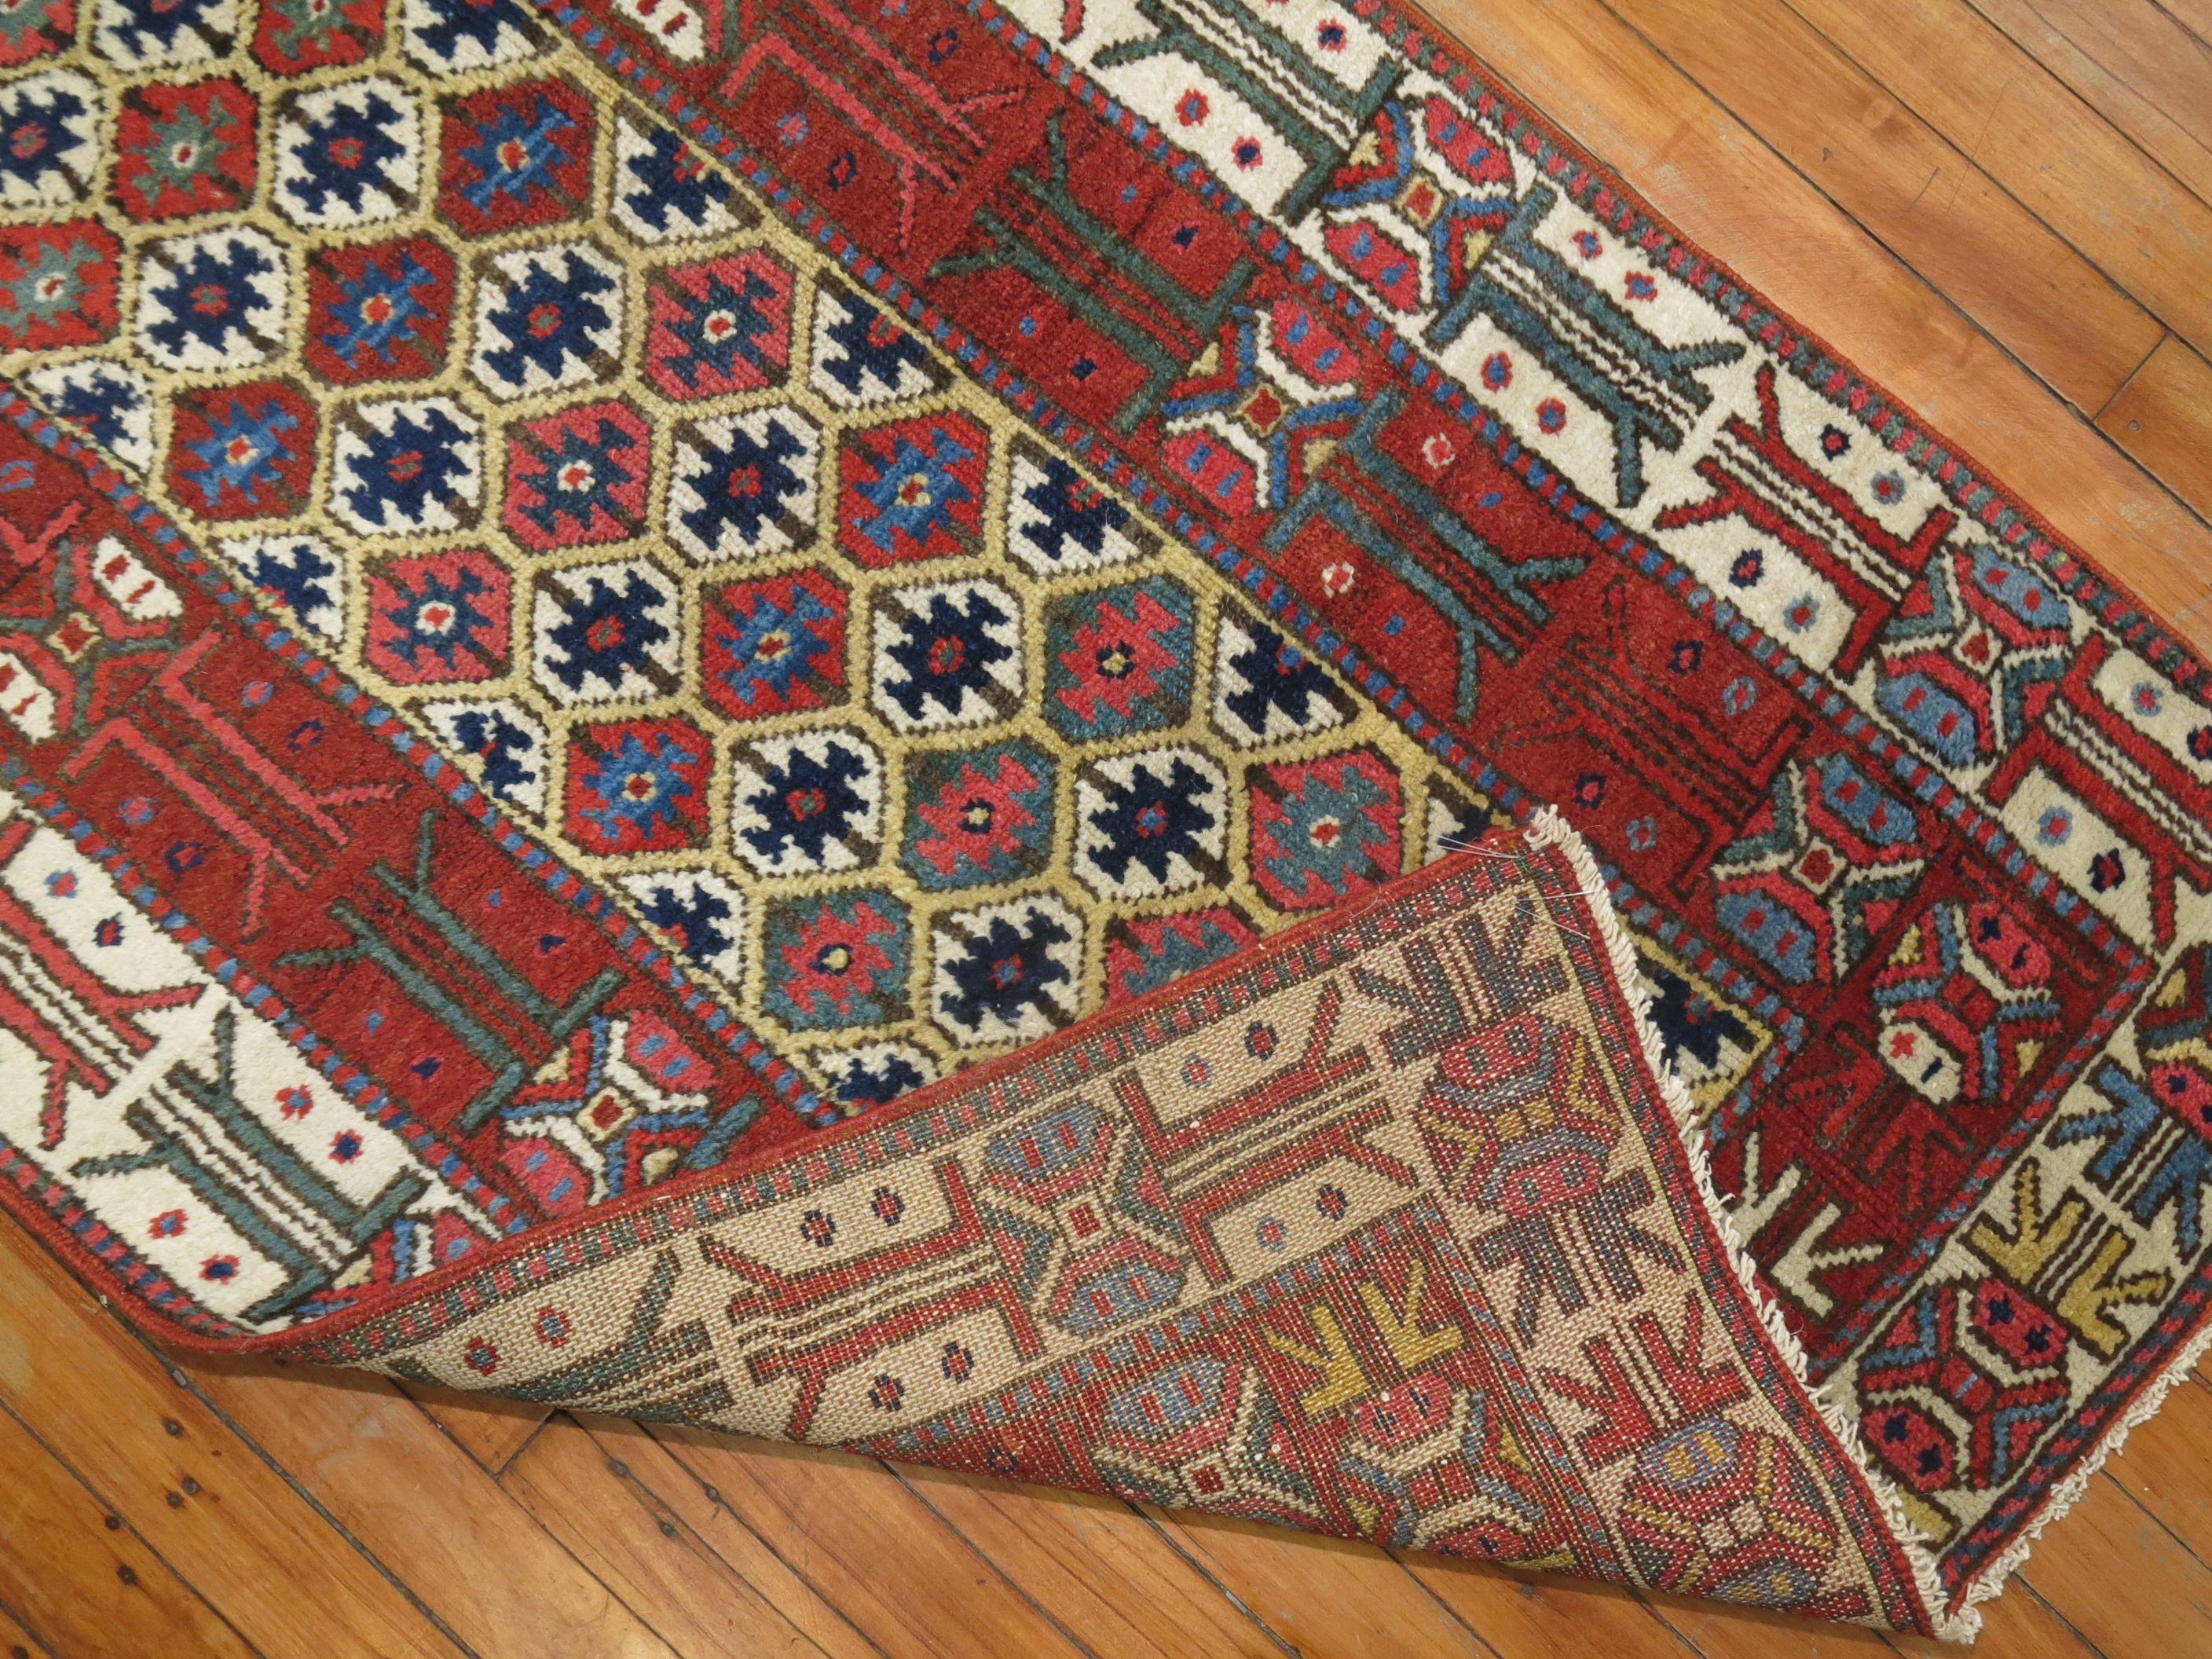 Spectacular tribal Kurdish runner with excellent pile and color, circa 1910.

Measures: 2'9” x 14'6”.